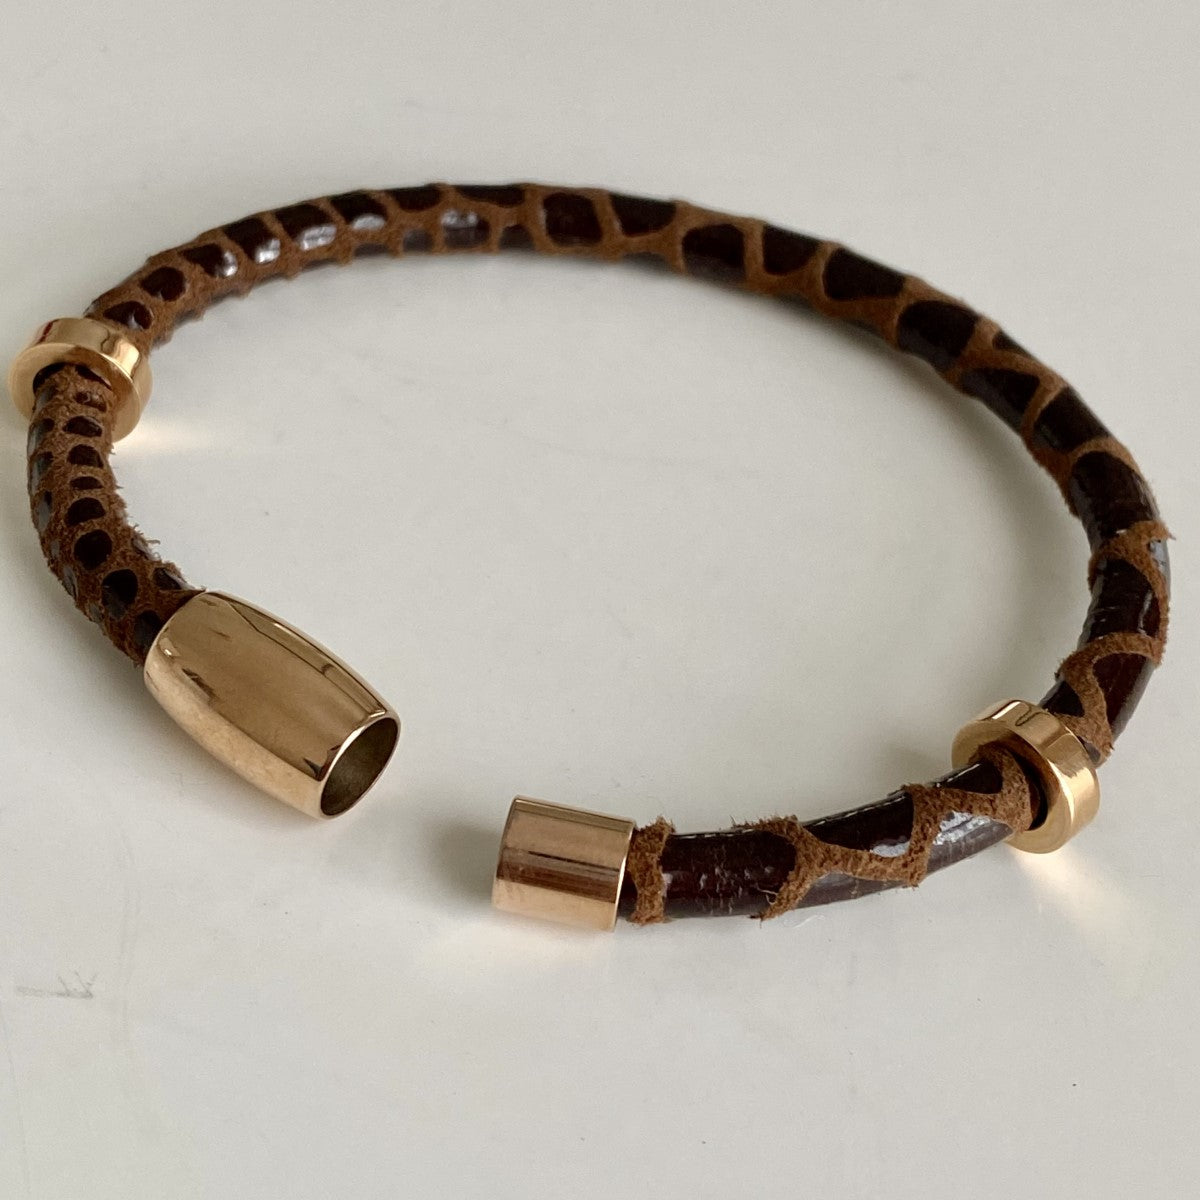 Brown Textured Leather Men's Bracelet with a Magnetic Rose Gold Plated Steel Clasp and Spacers